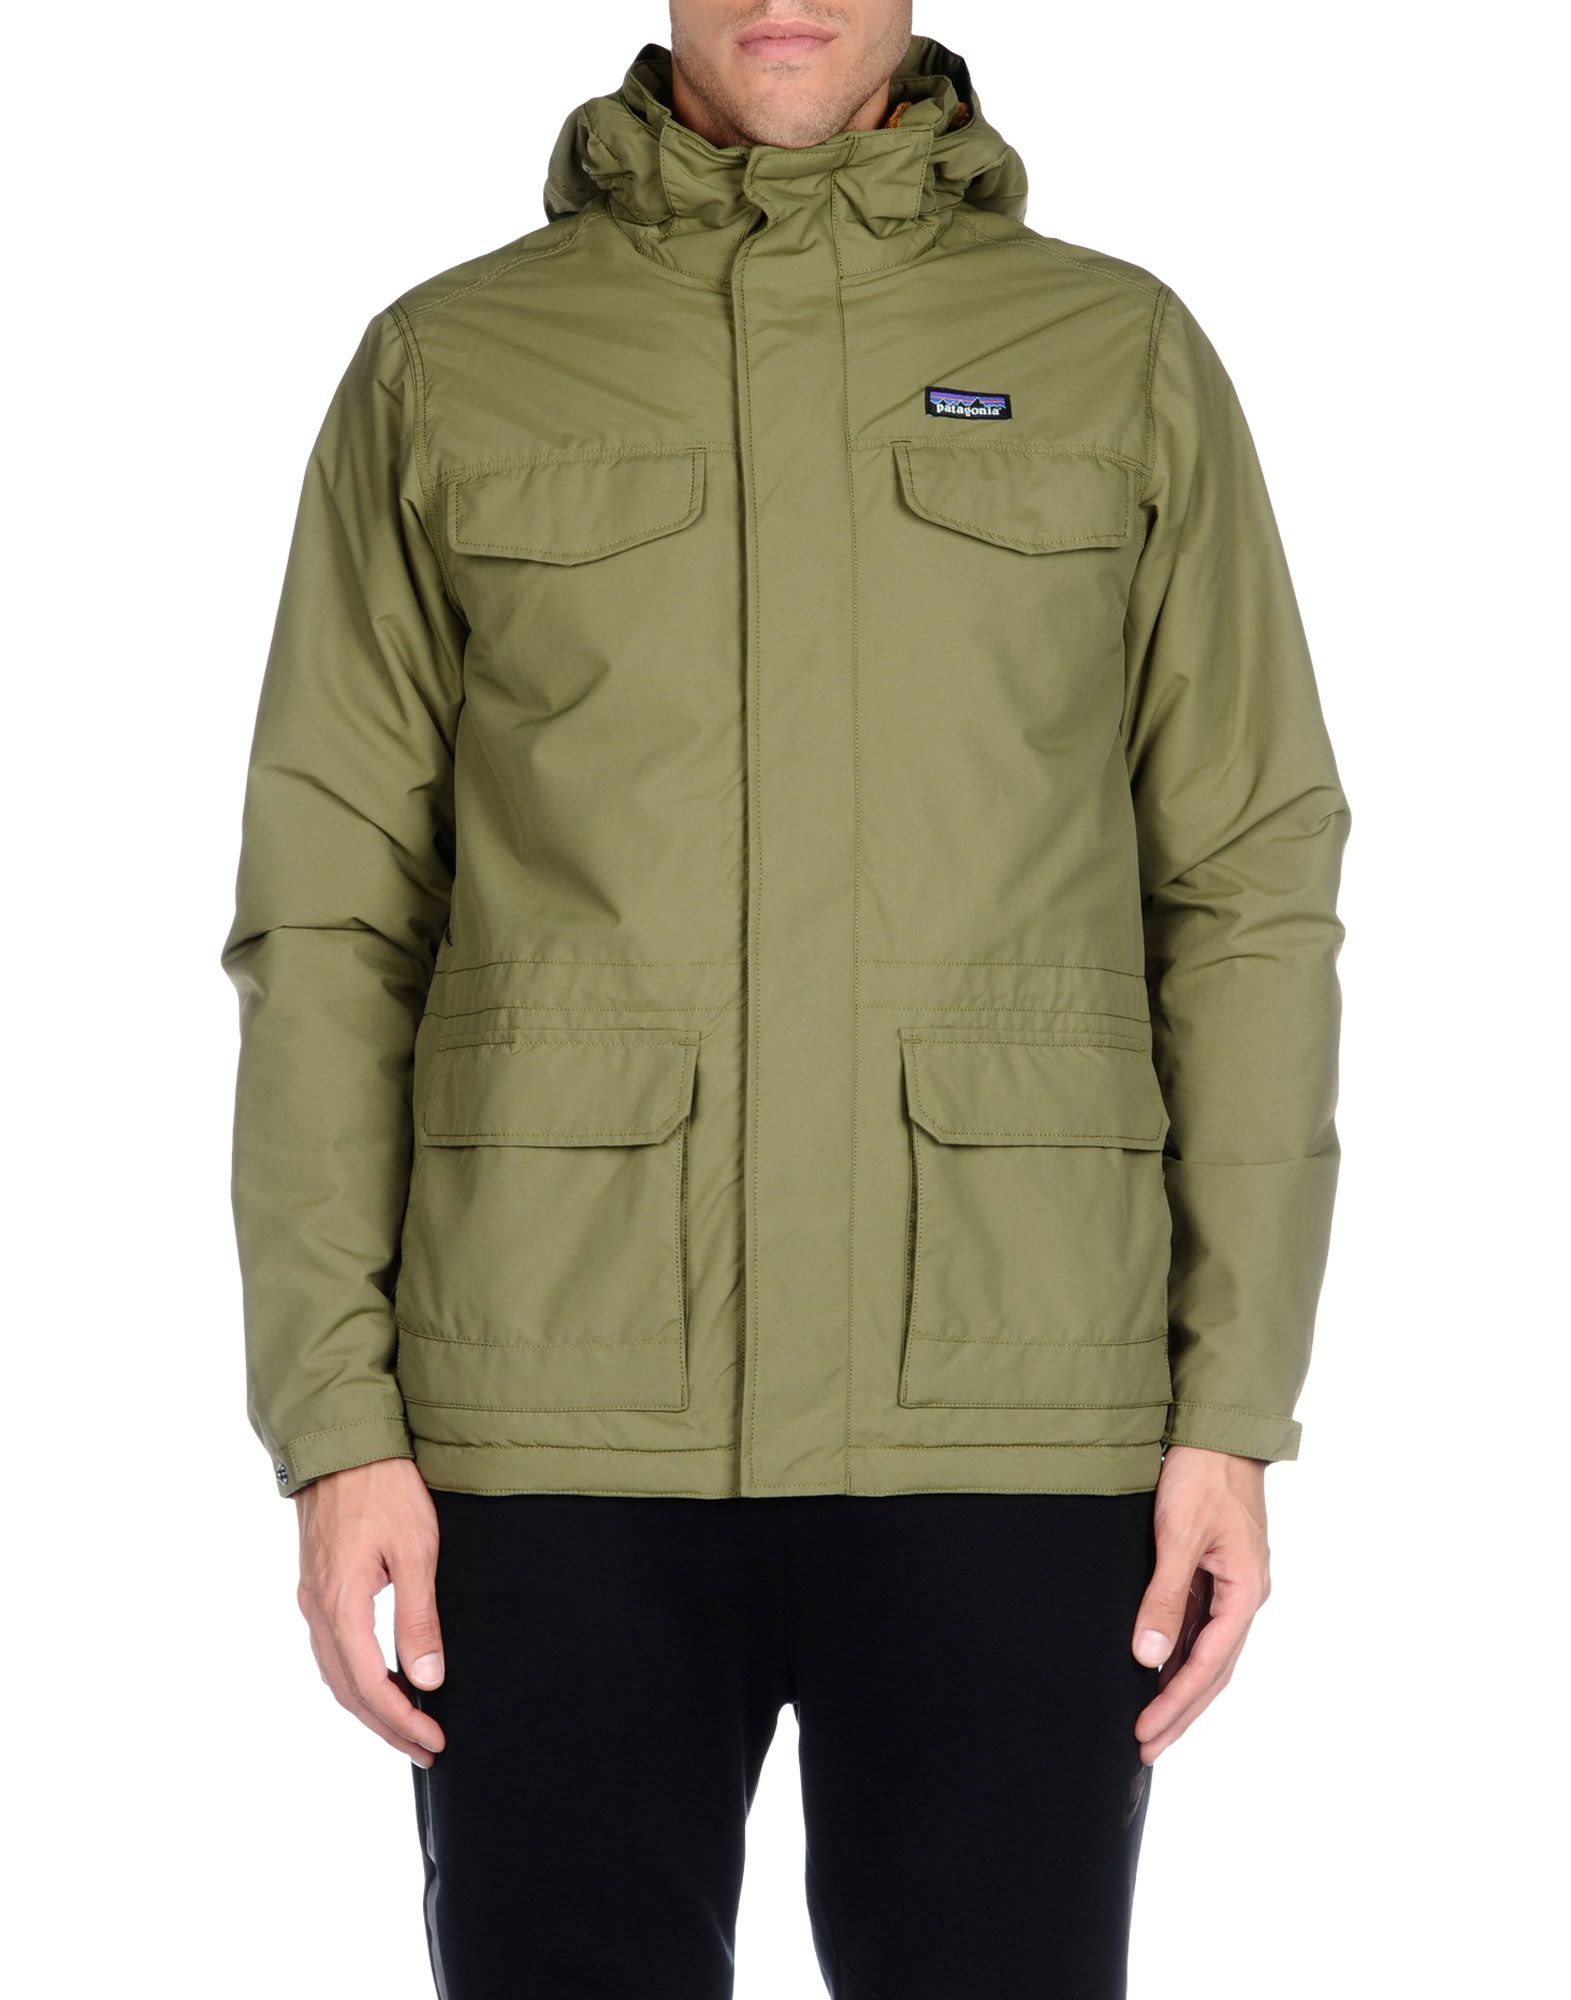 Patagonia Jacket in Green for Men - Lyst